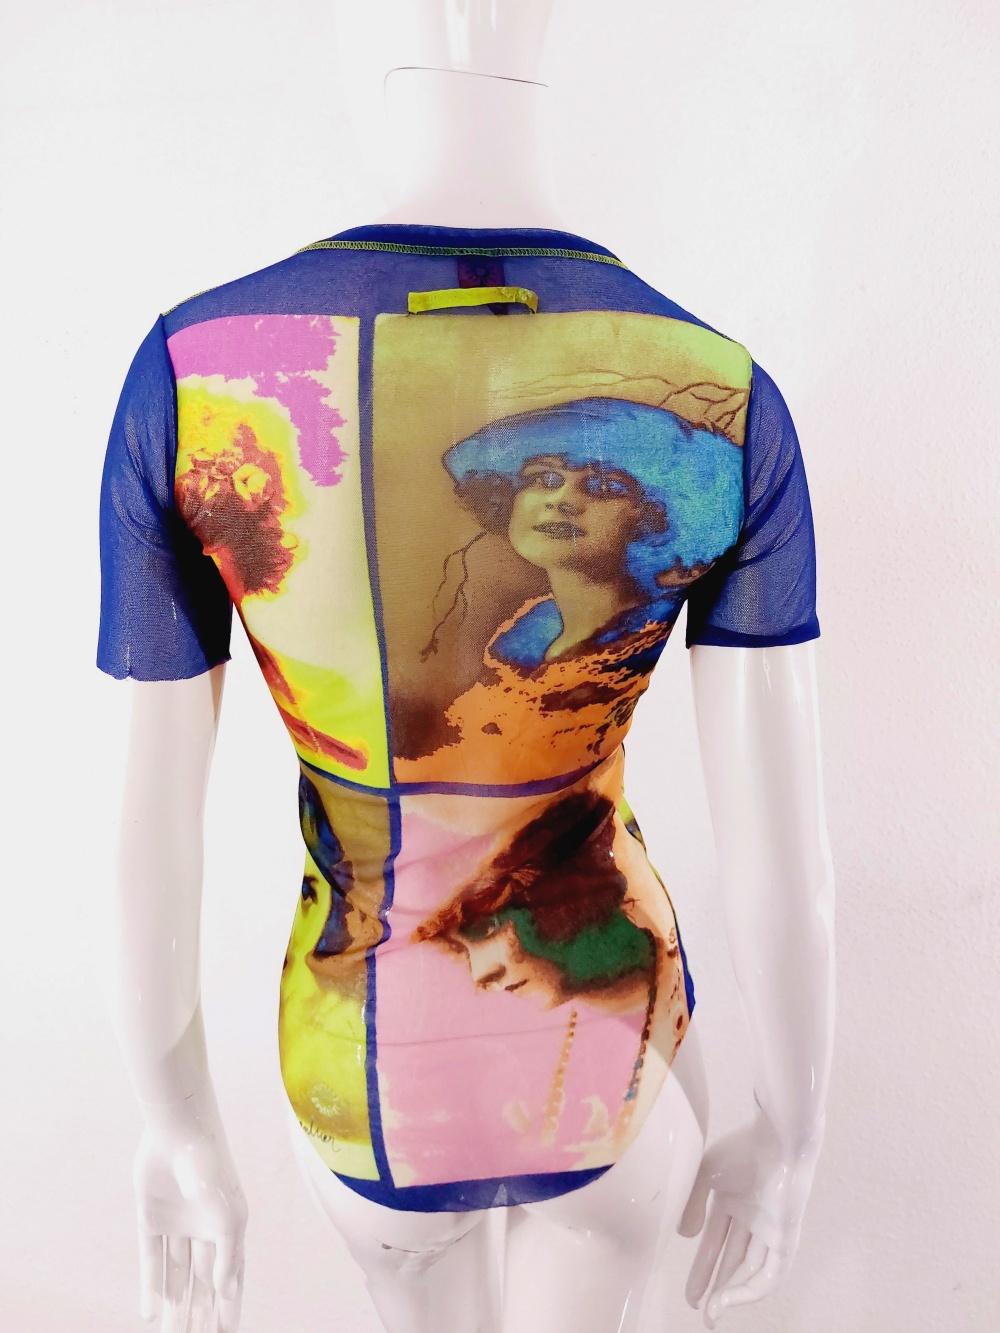 Jean Paul Gaultier Kylie Jenner Kim Mesh Portrait Saturated Faces Top Shirt Tee For Sale 3